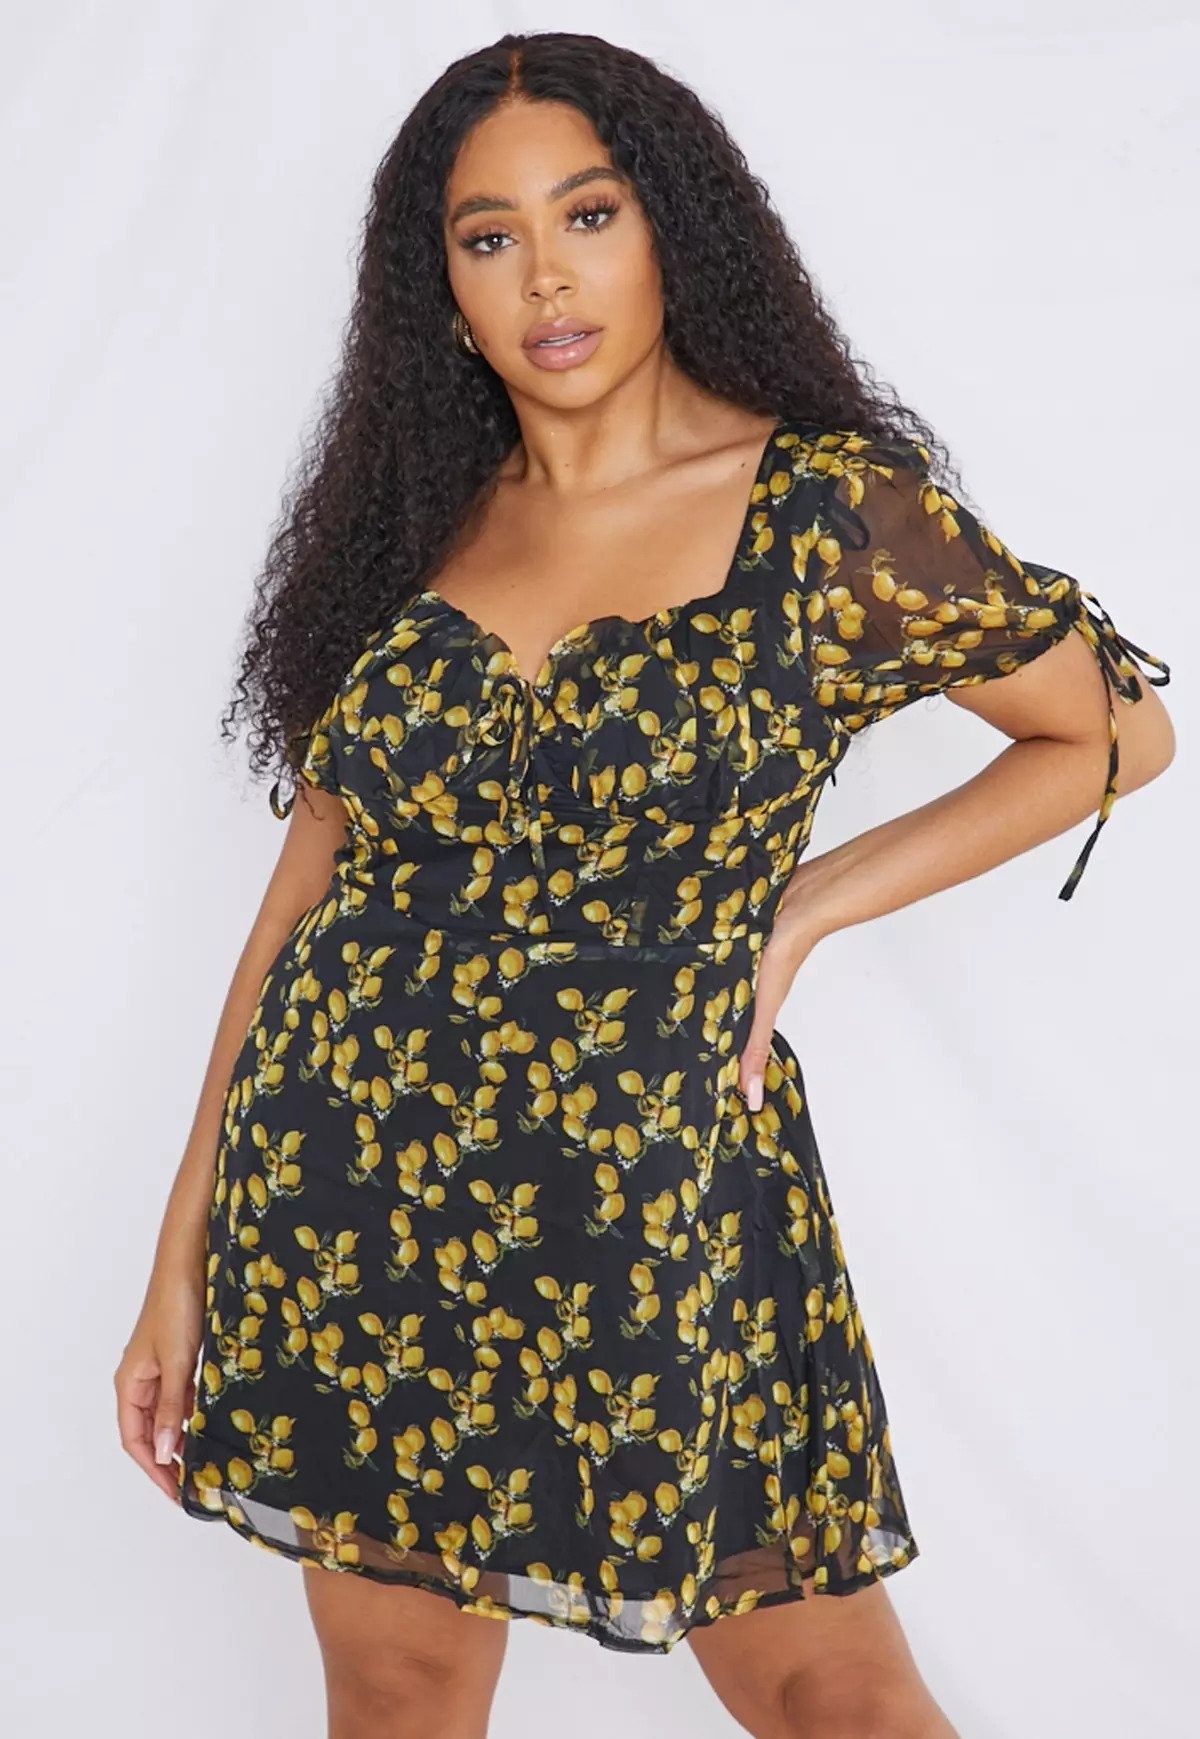 31 Dresses For Anyone Who Doesn't Want To Put Much Thought Into What To ...